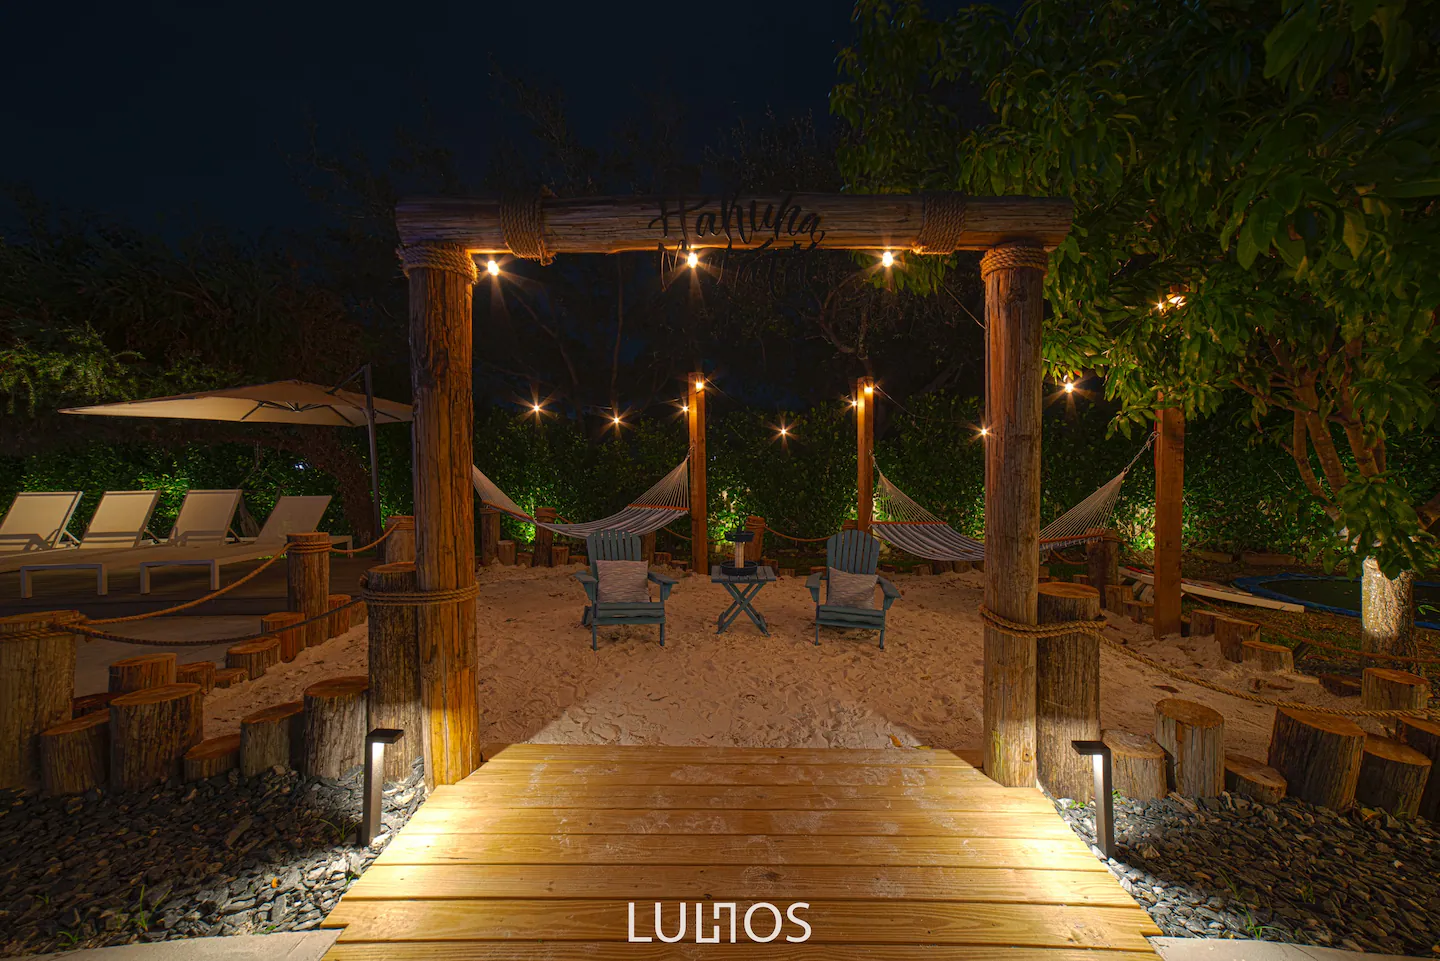 Enjoy our carefully designed outdoor space and let yourself be seduced by the unique atmosphere provided by the night lighting